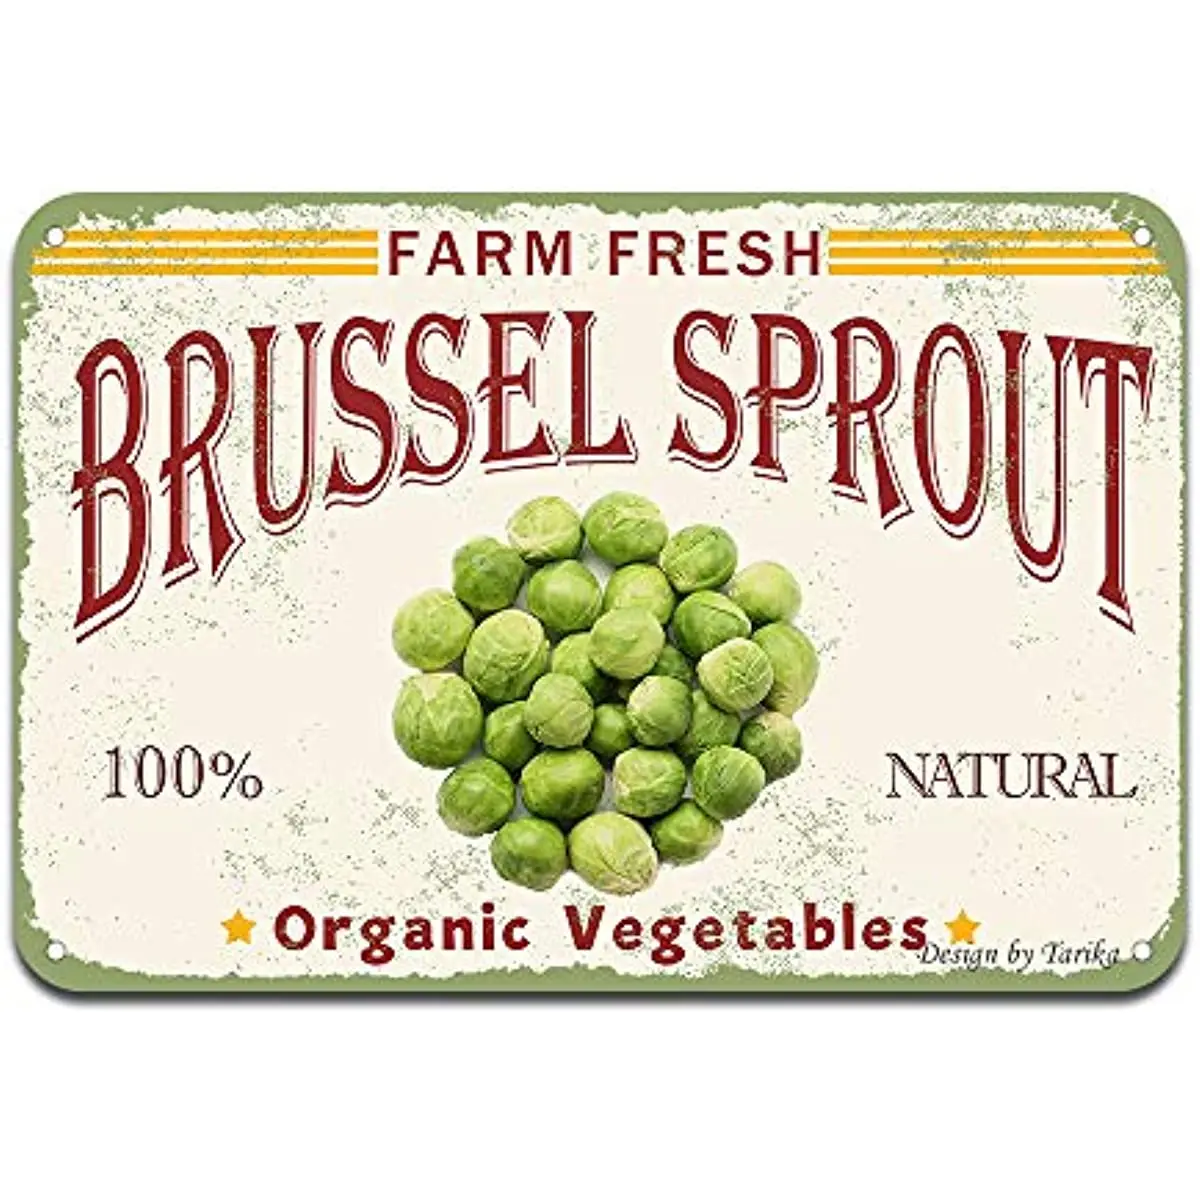 

Farm Fresh Brussel Sprout Nature Organic Vegetables Iron Poster Painting Tin Sign Vintage Wall Decor for Cafe Bar Pub Home Beer